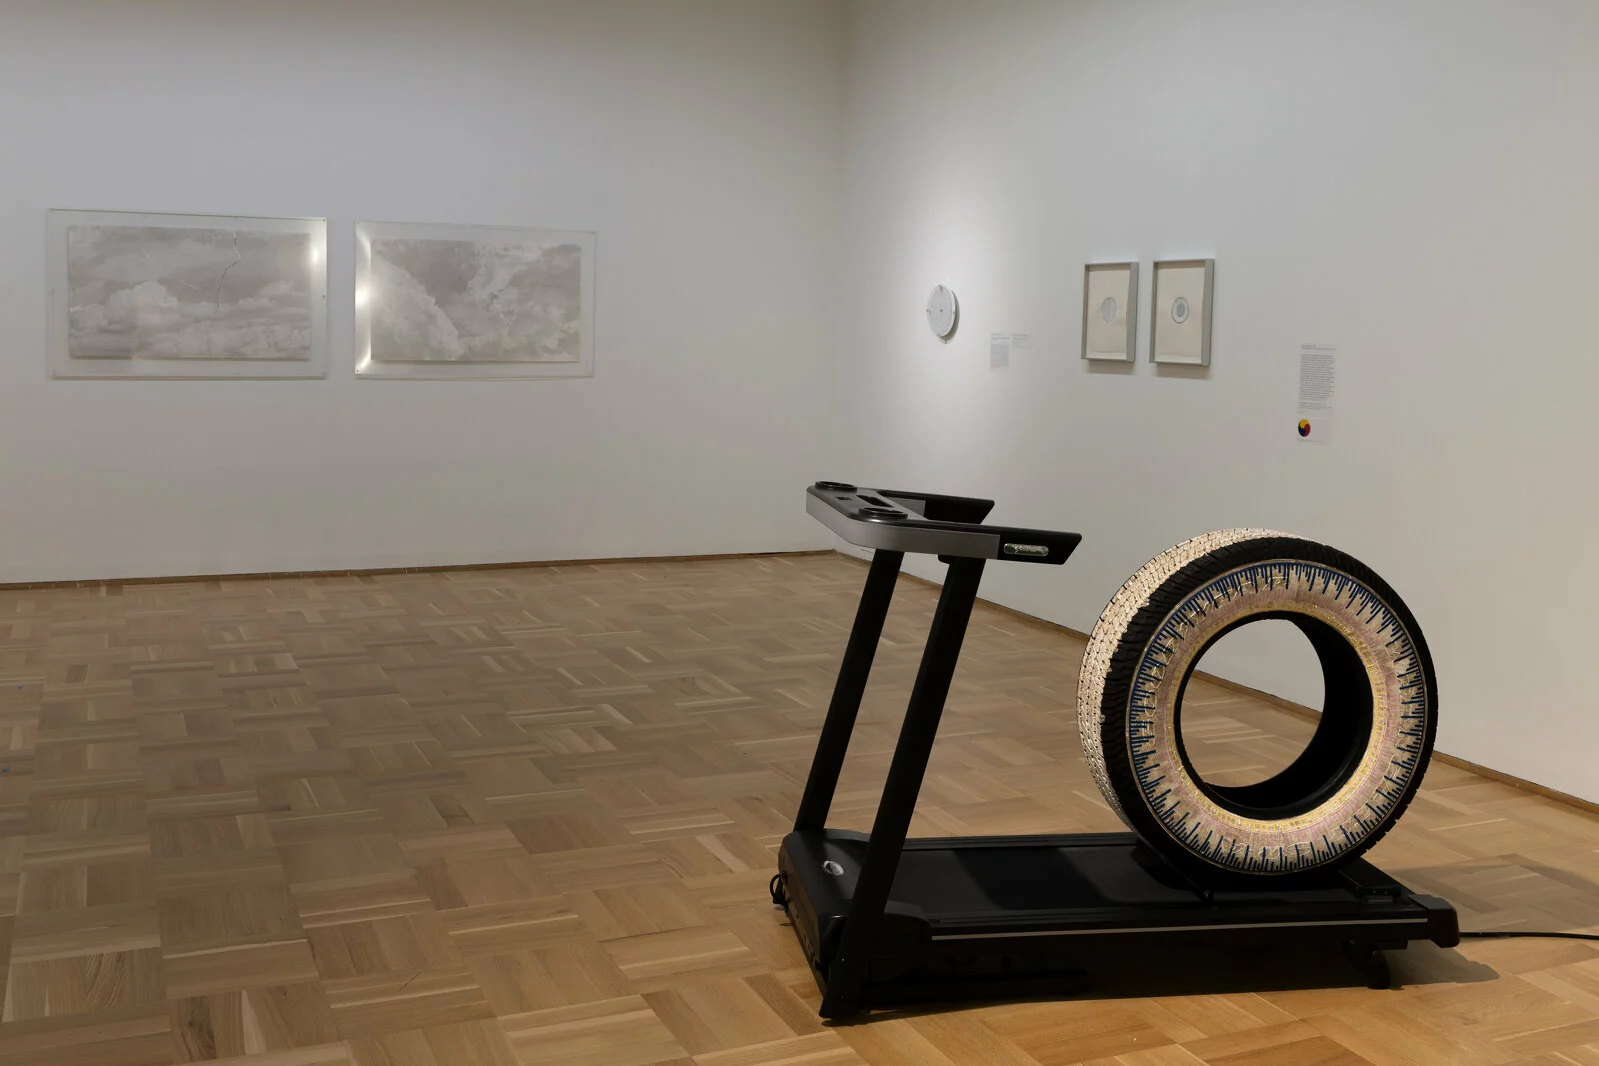 Gallery space with tire on a treadmill filling right foreground of image. Other artworks can be seen hung on the walls.